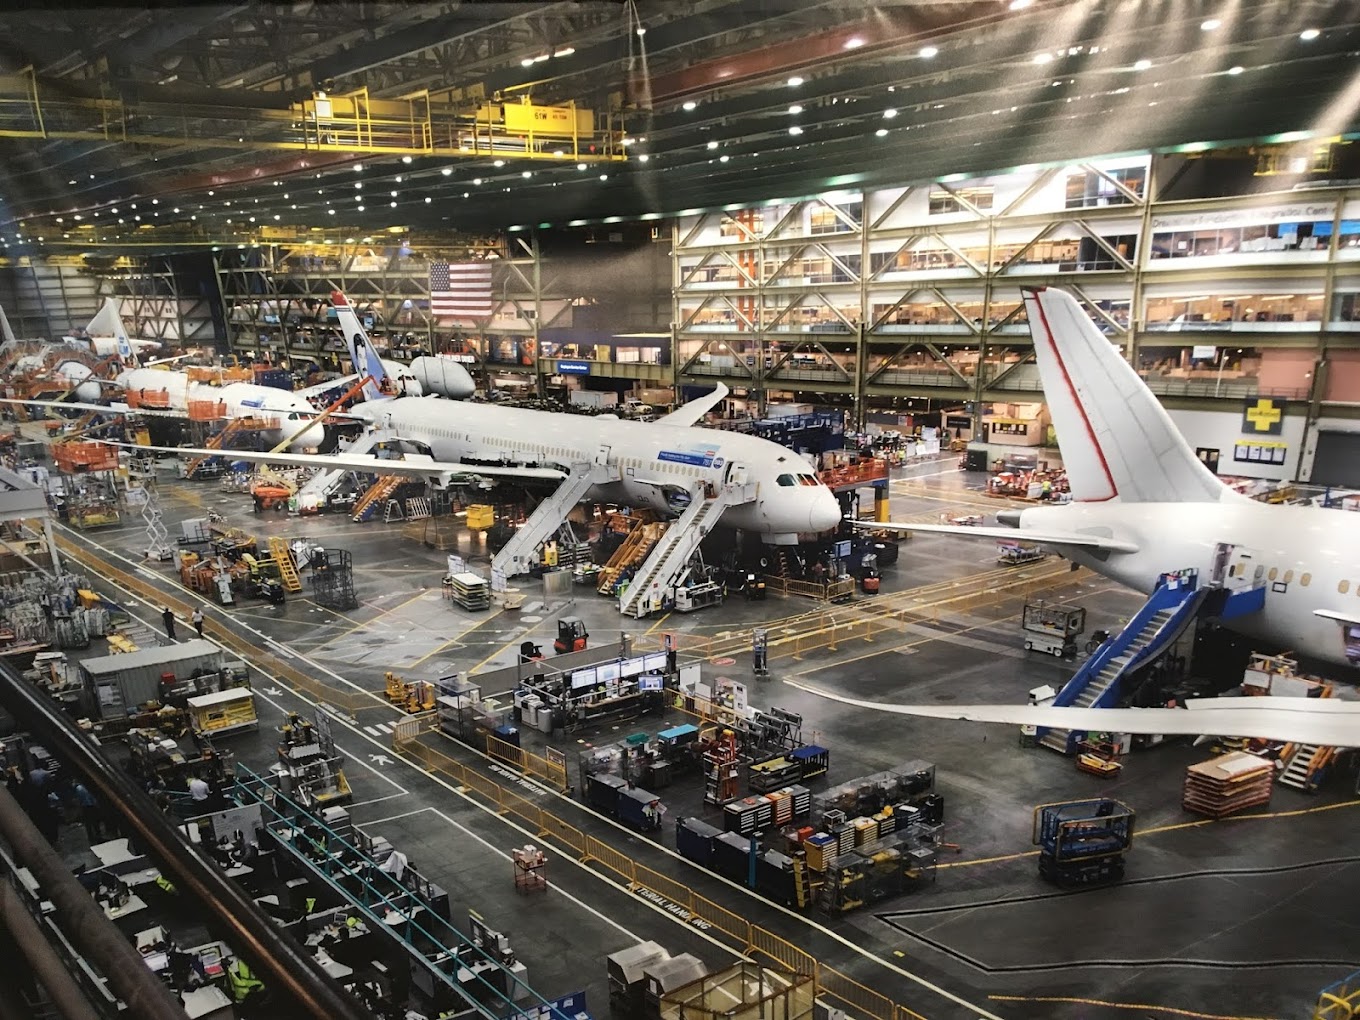 Boeing's Annual plane production